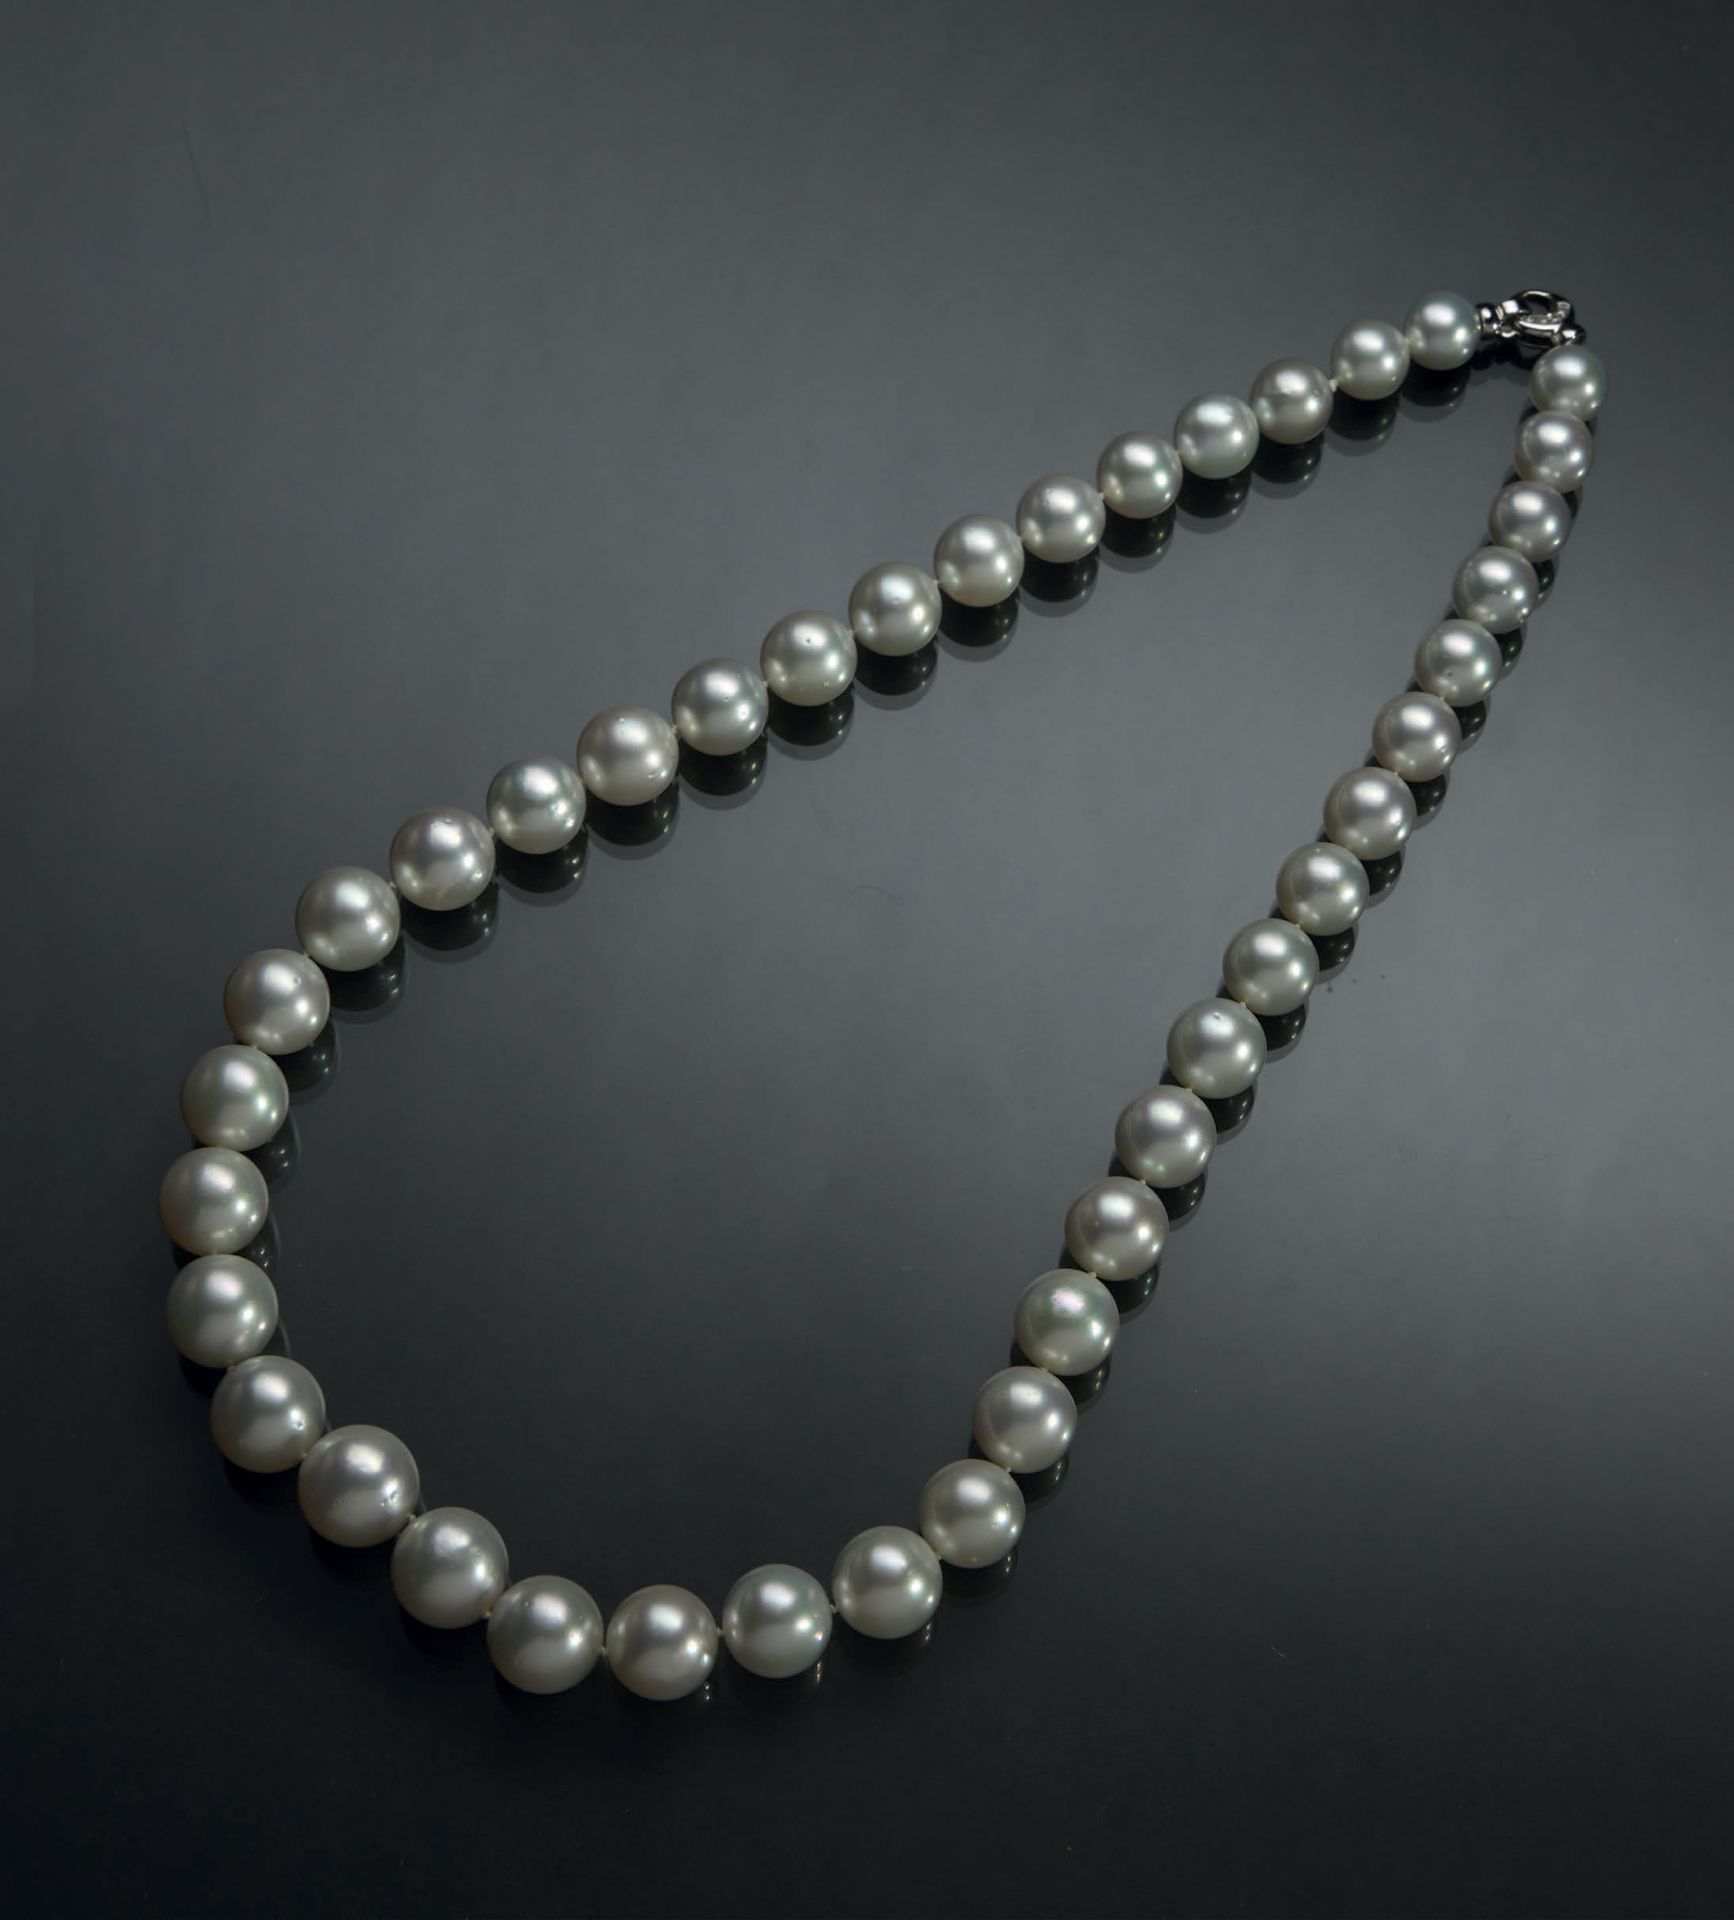 Null Necklace of 40 South Sea cultured pearls
From 11 to 15 mm in diameter
Clasp&hellip;